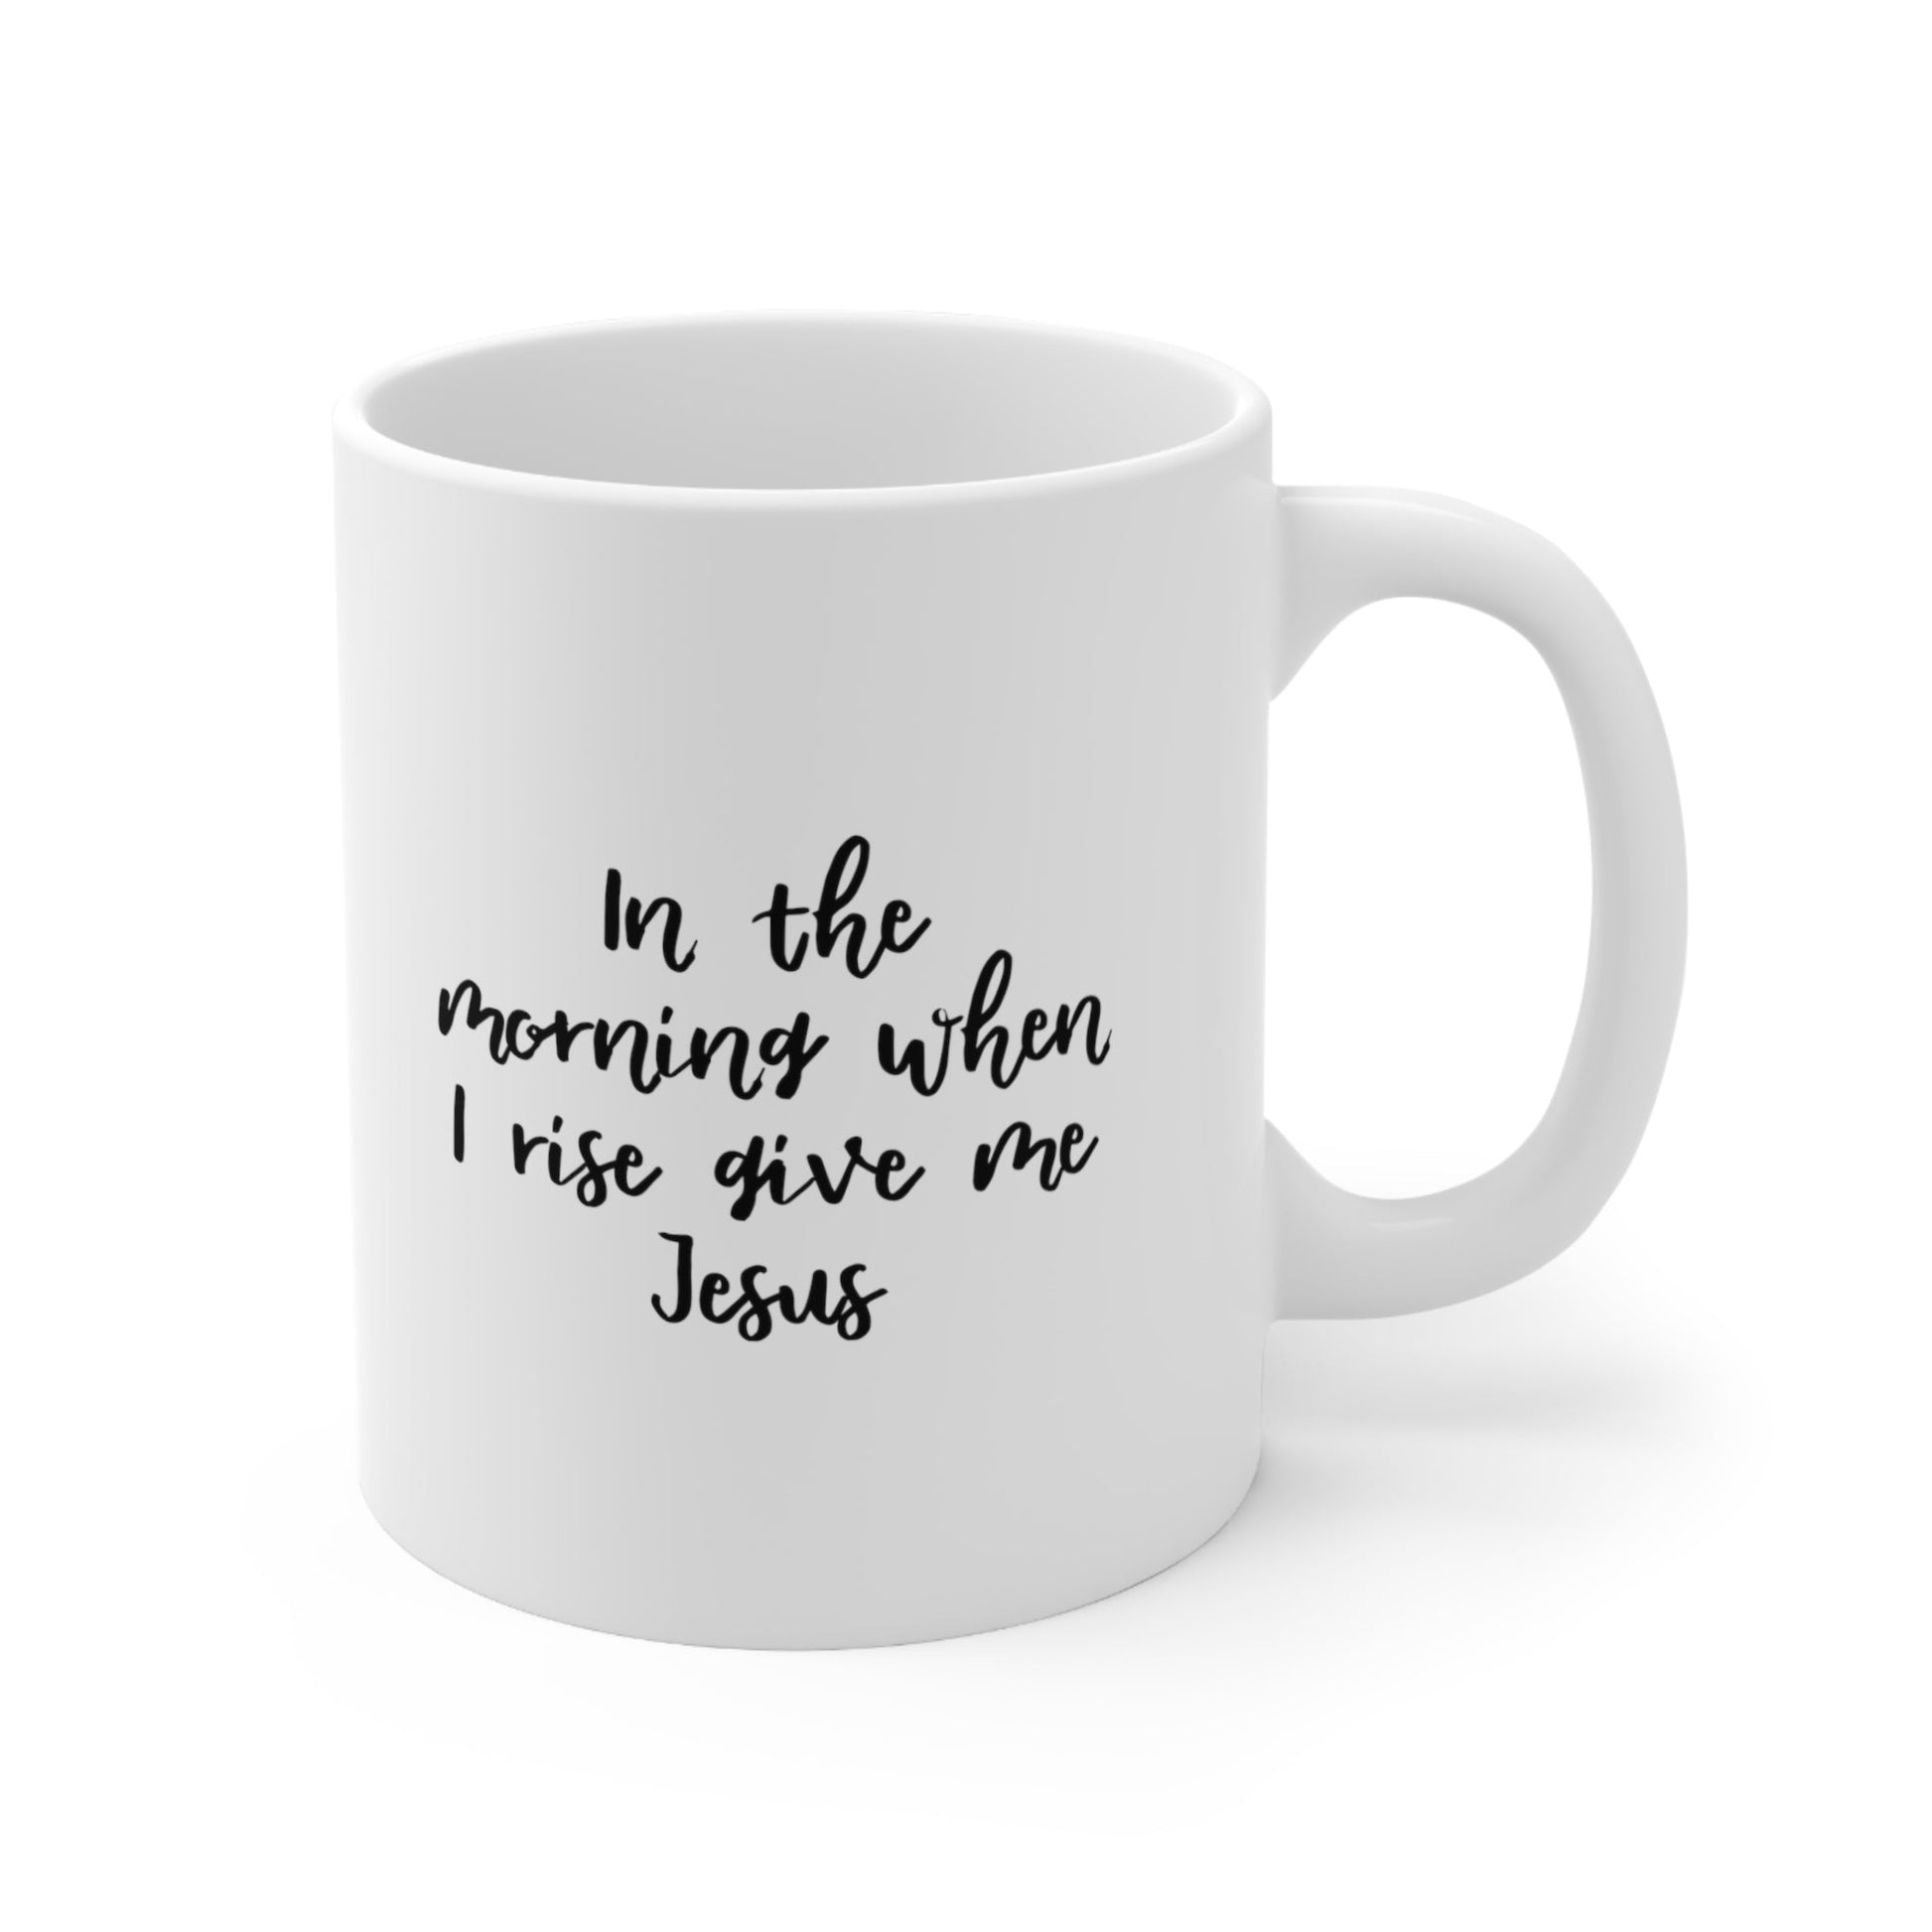 In the Morning When I Rise Give Me Jesus Coffee Mug 11oz Jolly Mugs